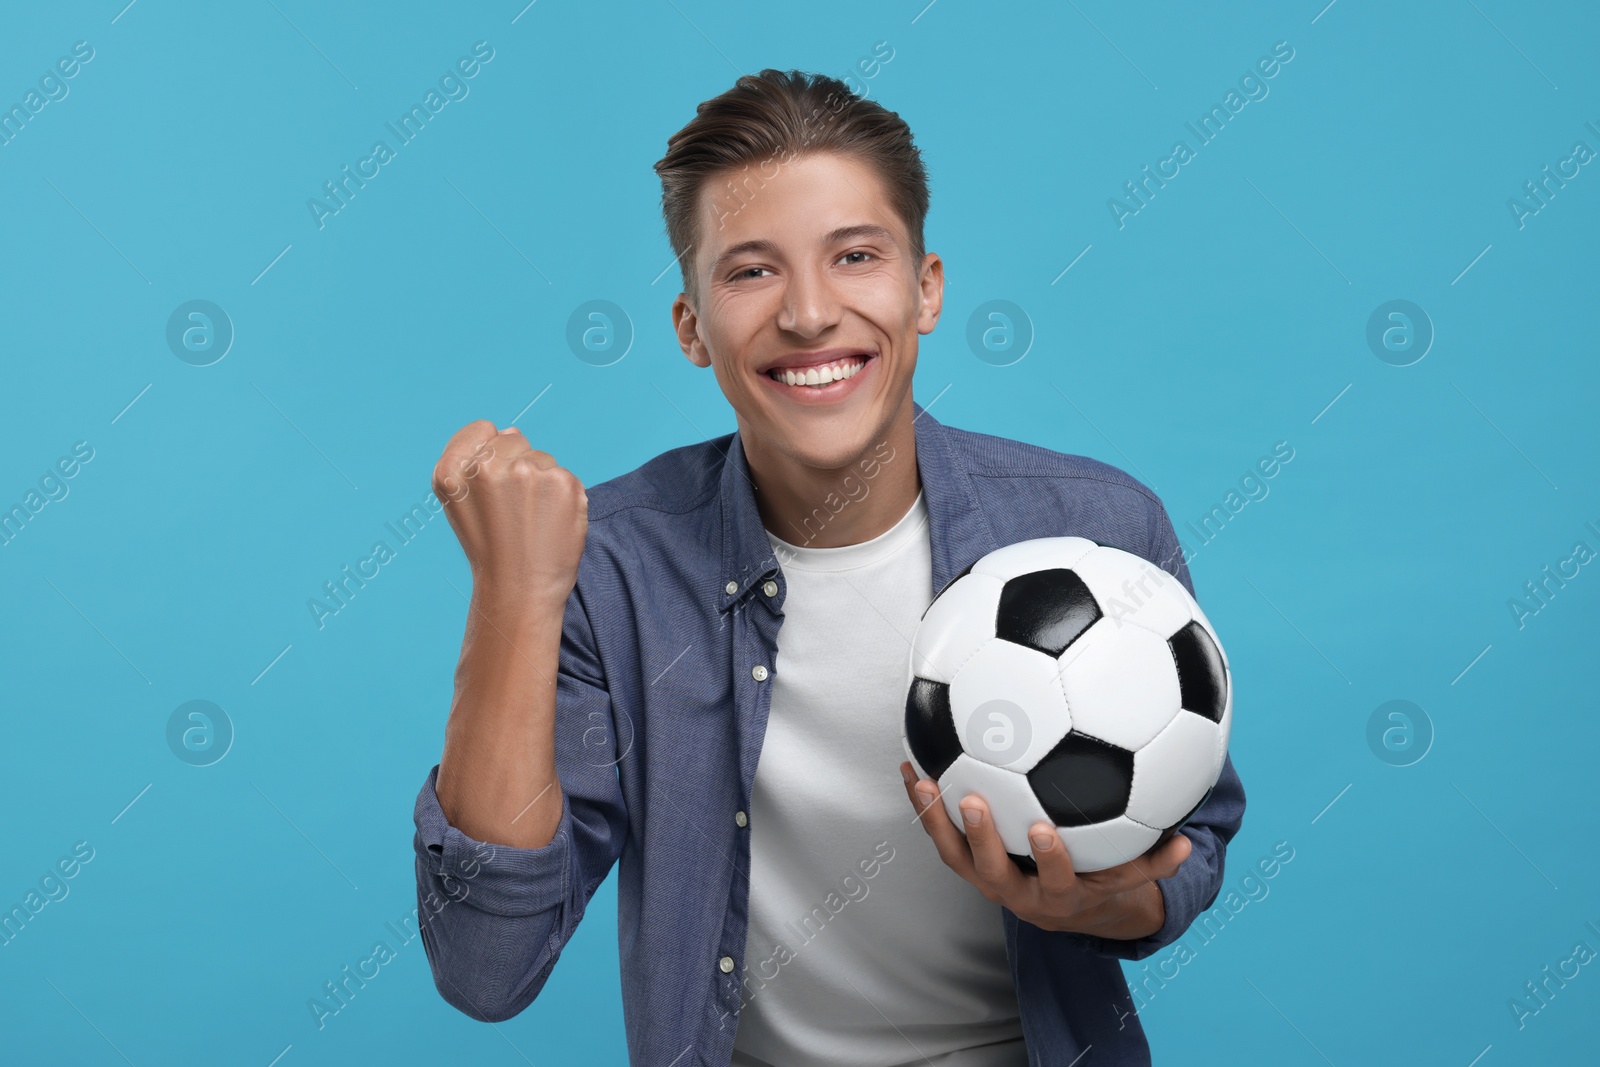 Photo of Happy sports fan with soccer ball celebrating on light blue background